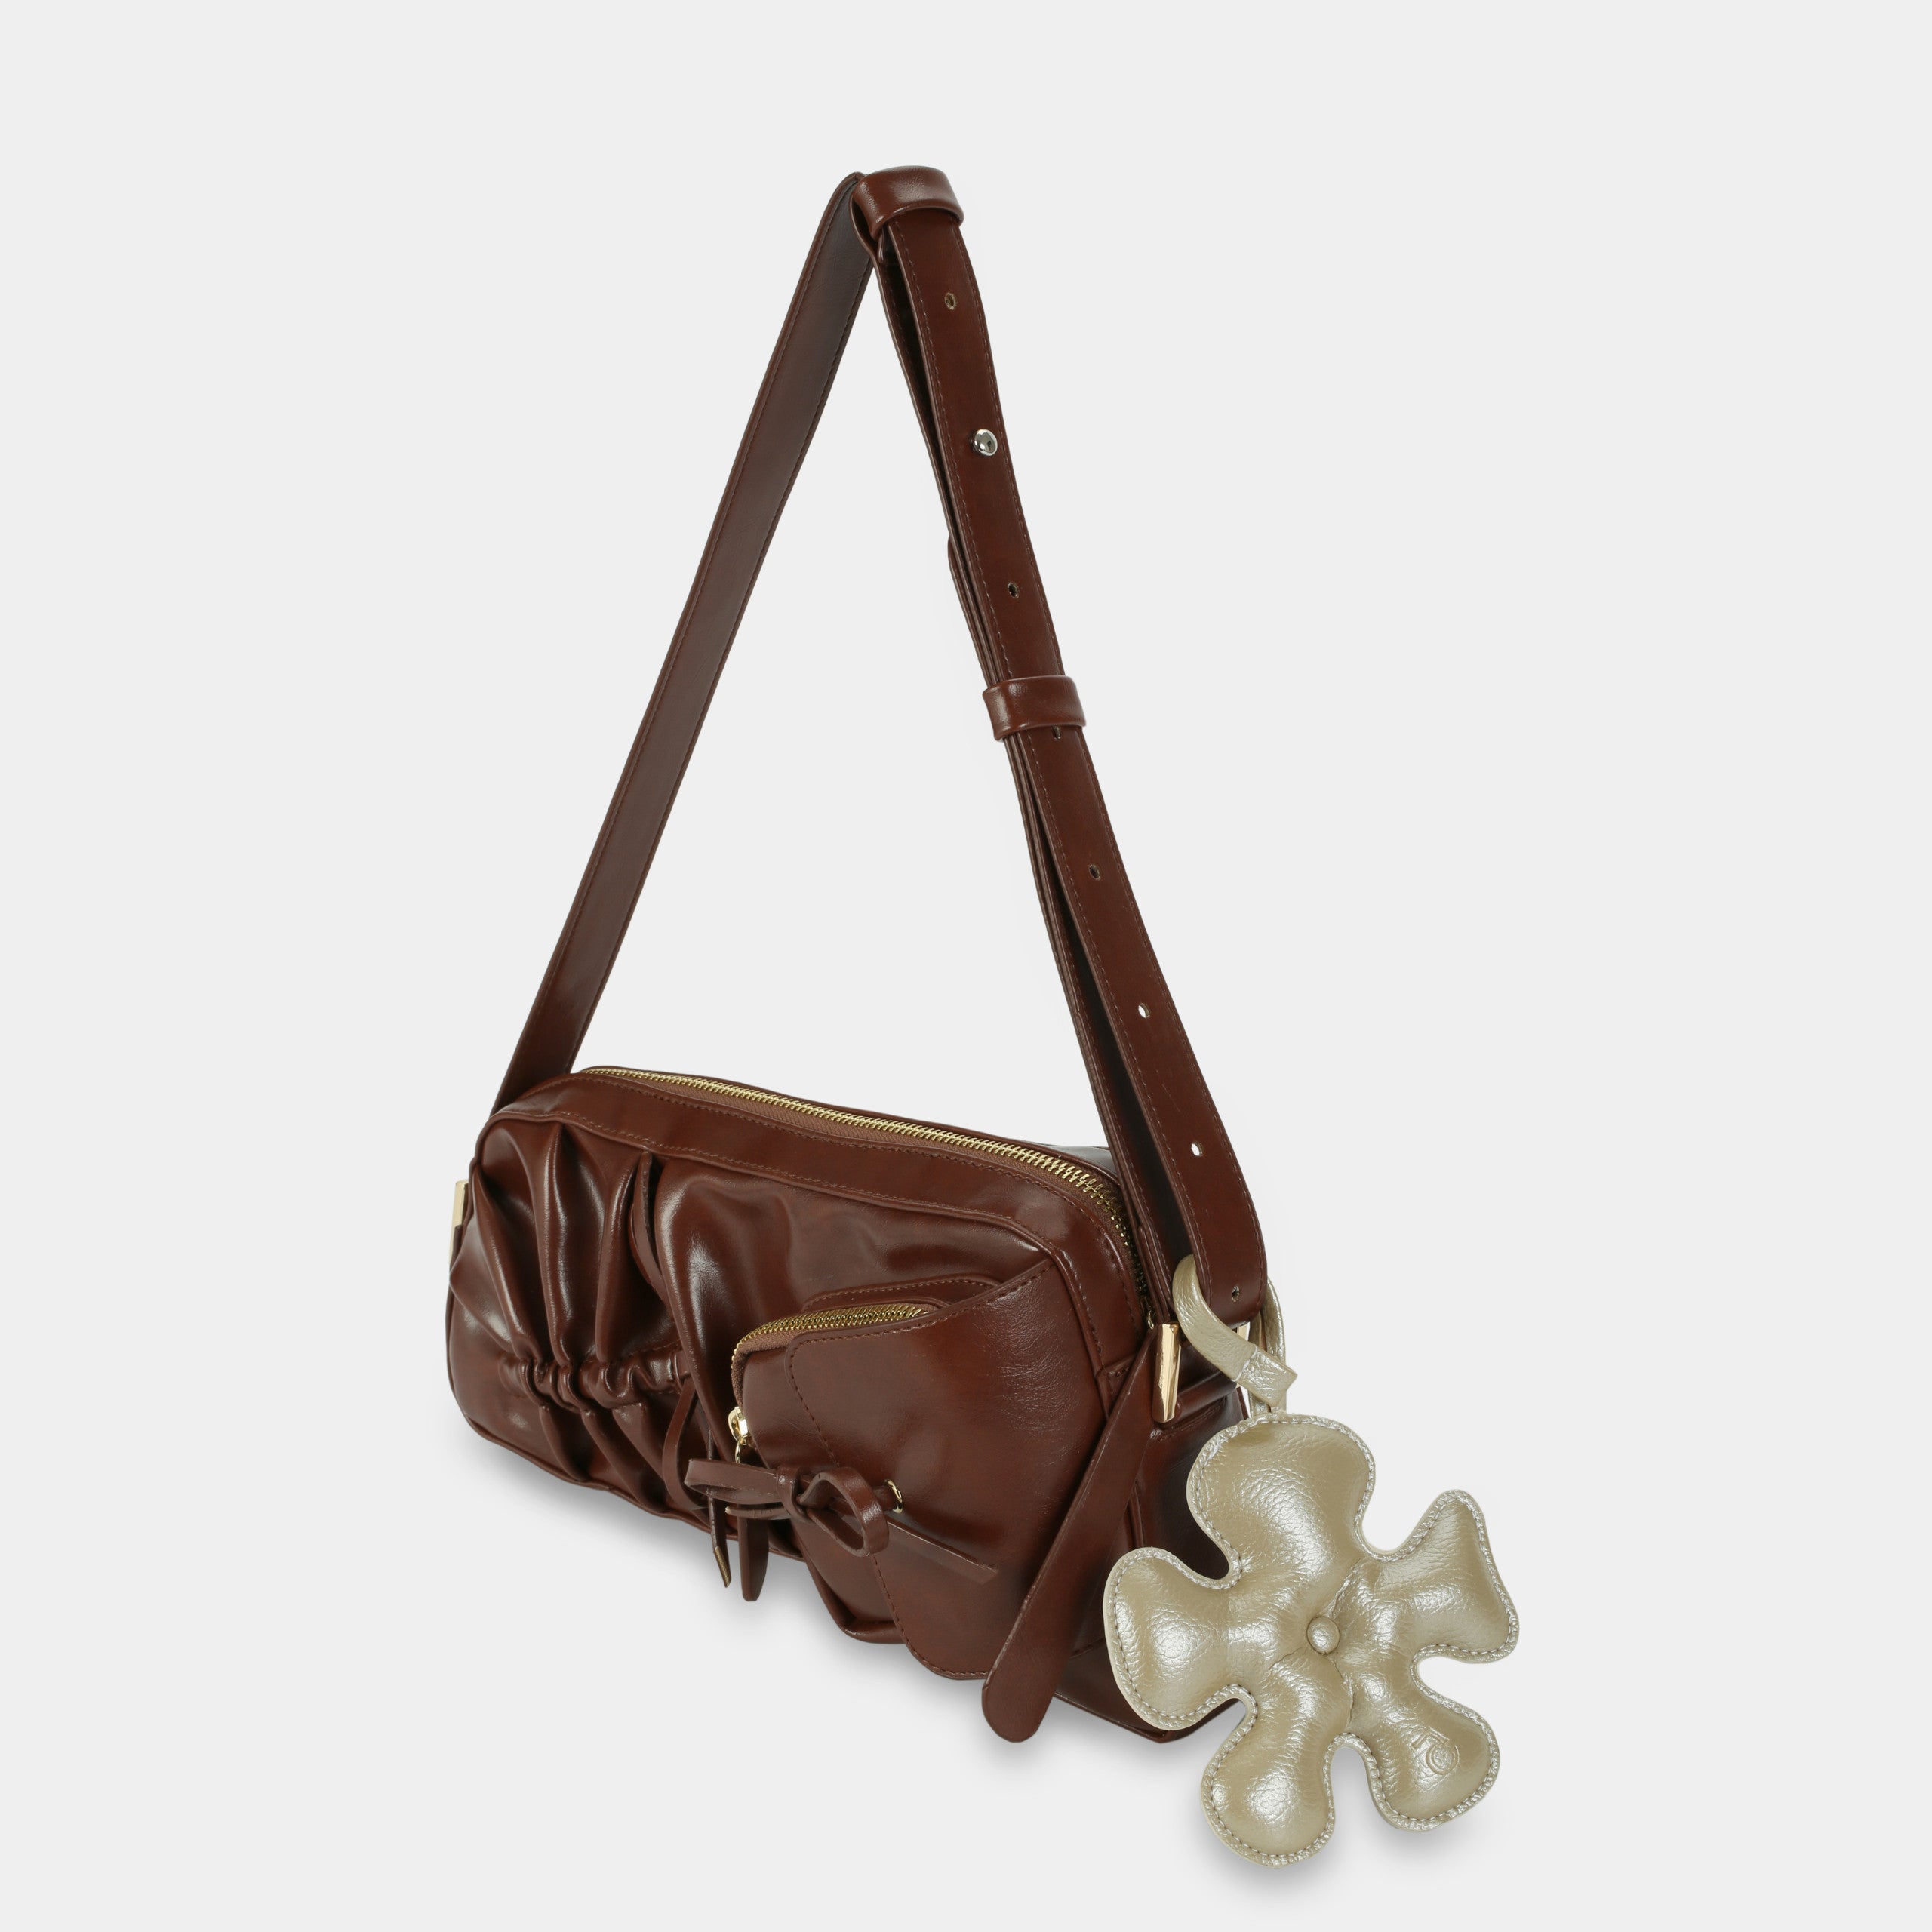 Freely Bag with Bow in Dark Brown